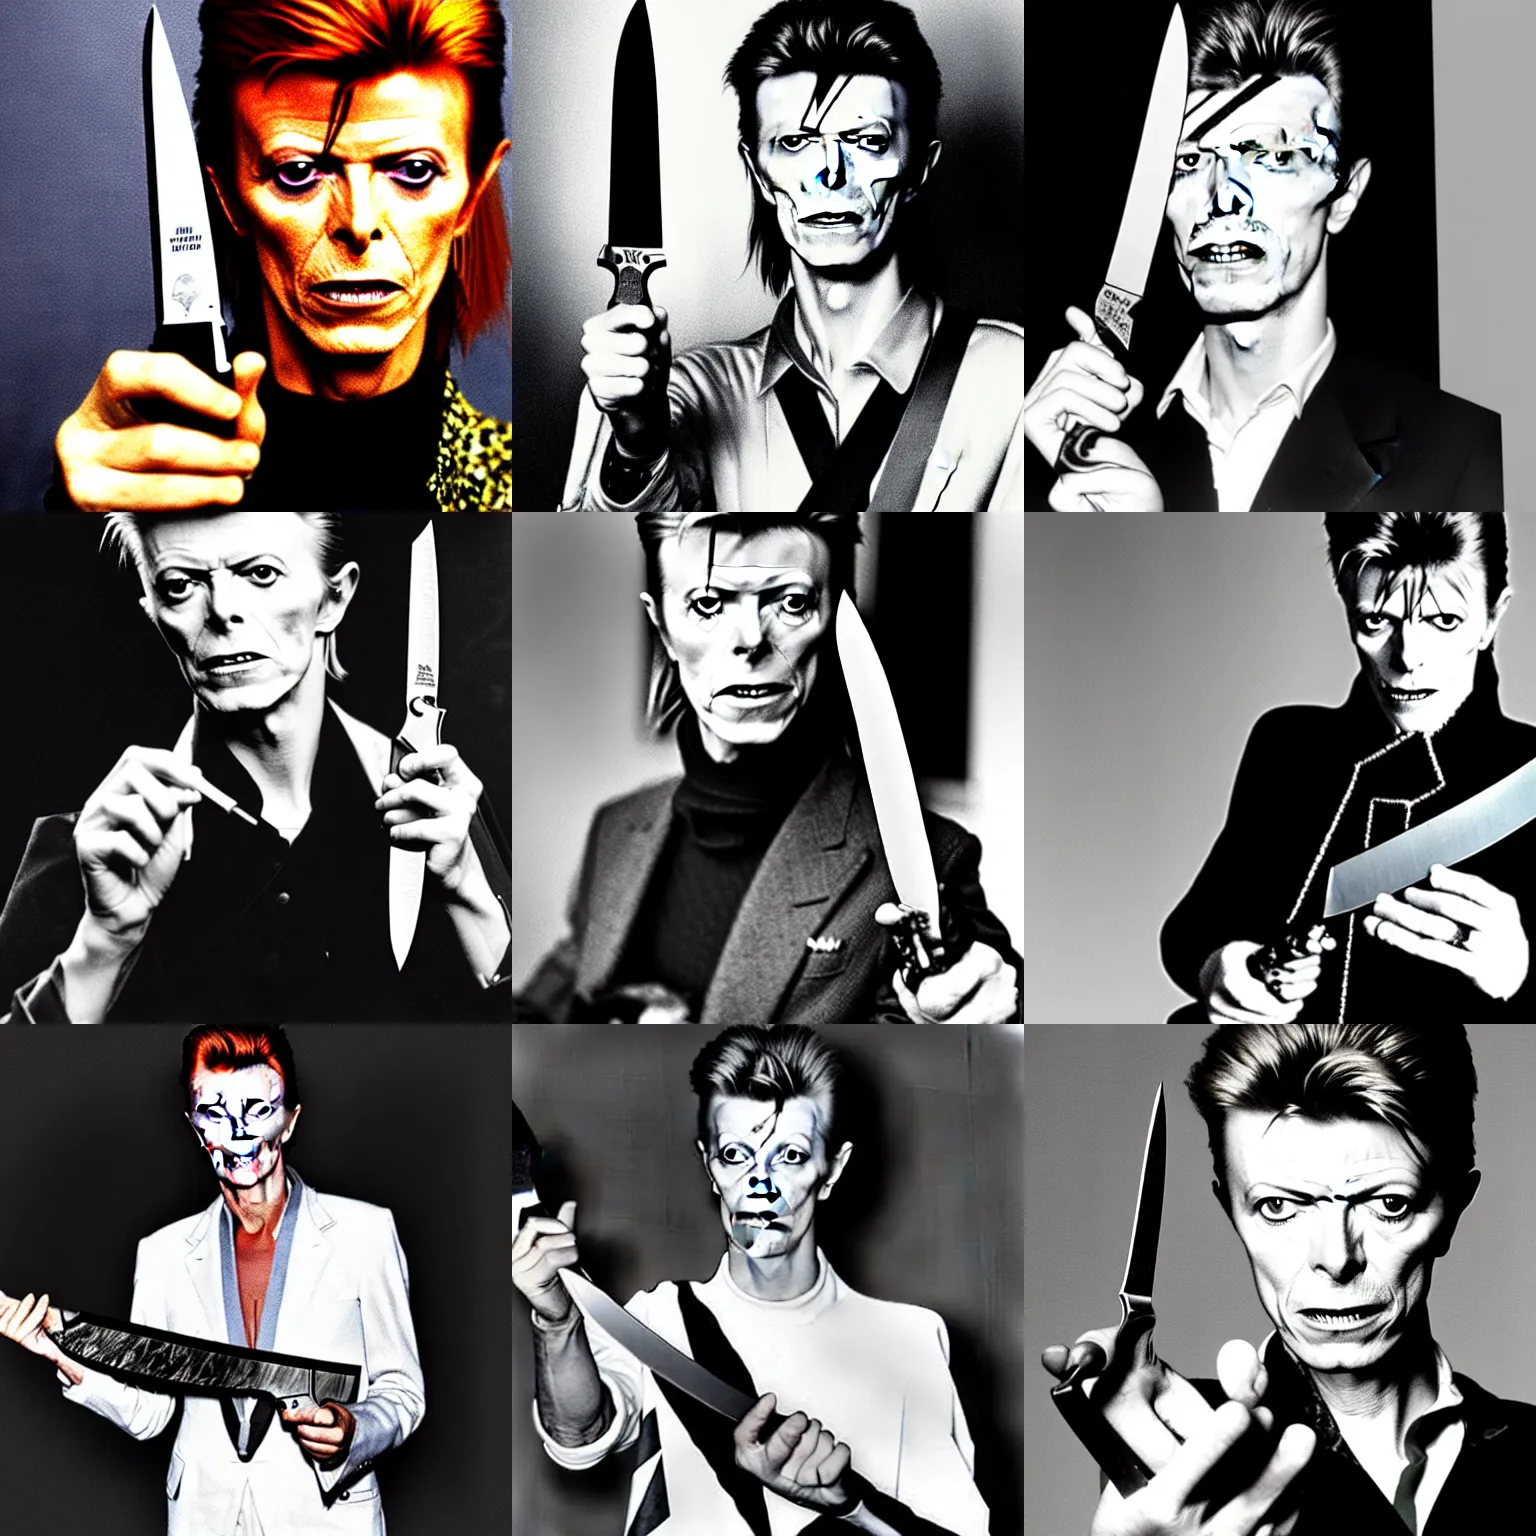 Prompt: David Bowie holding a Bowie knife